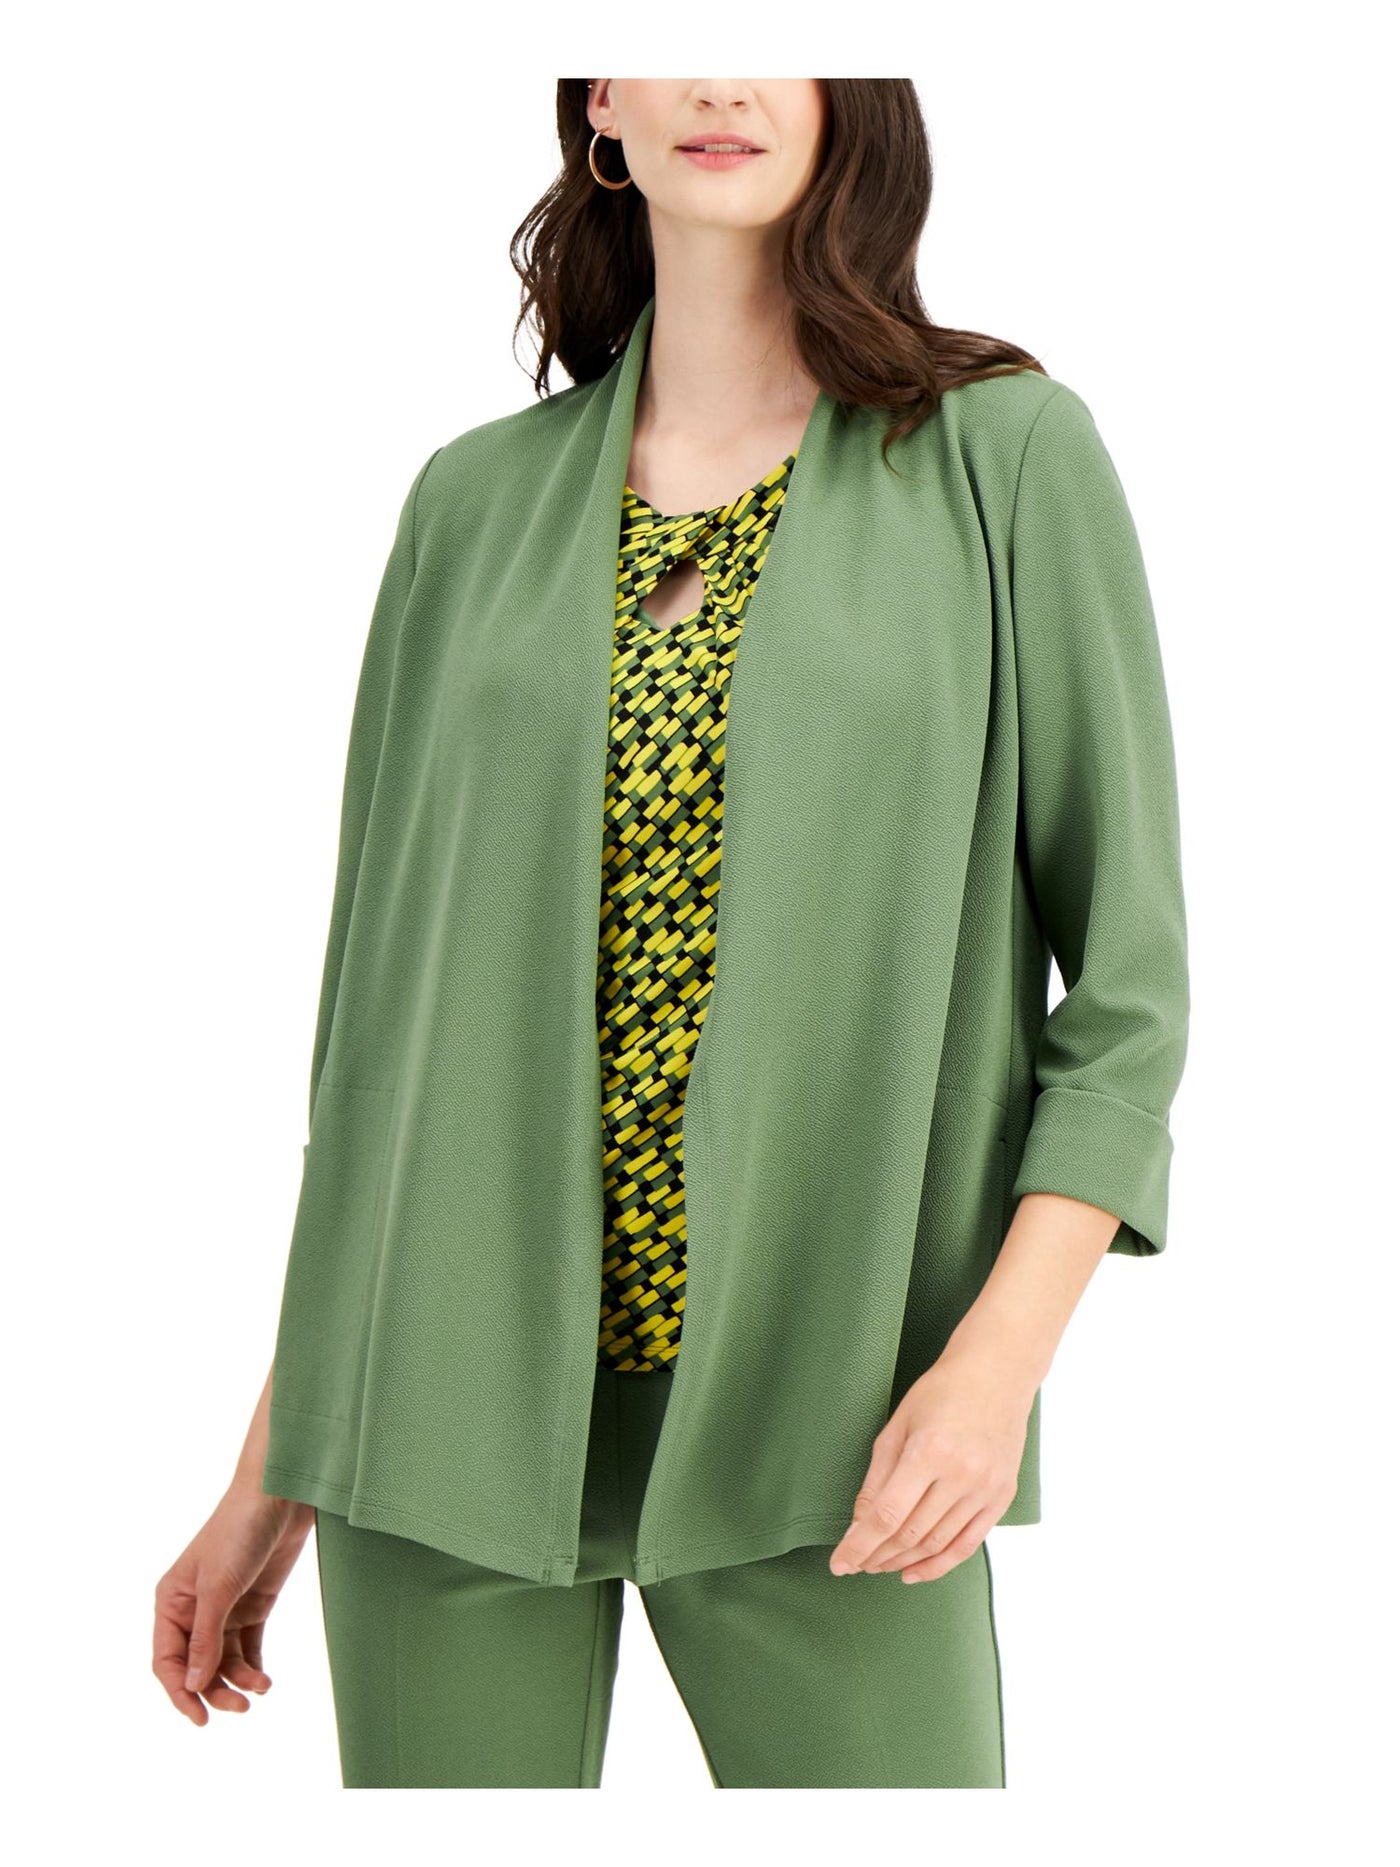 KASPER Womens Green Stretch Textured Pocketed Open-front Cardigan 3/4 Sleeve Wear To Work Jacket XS